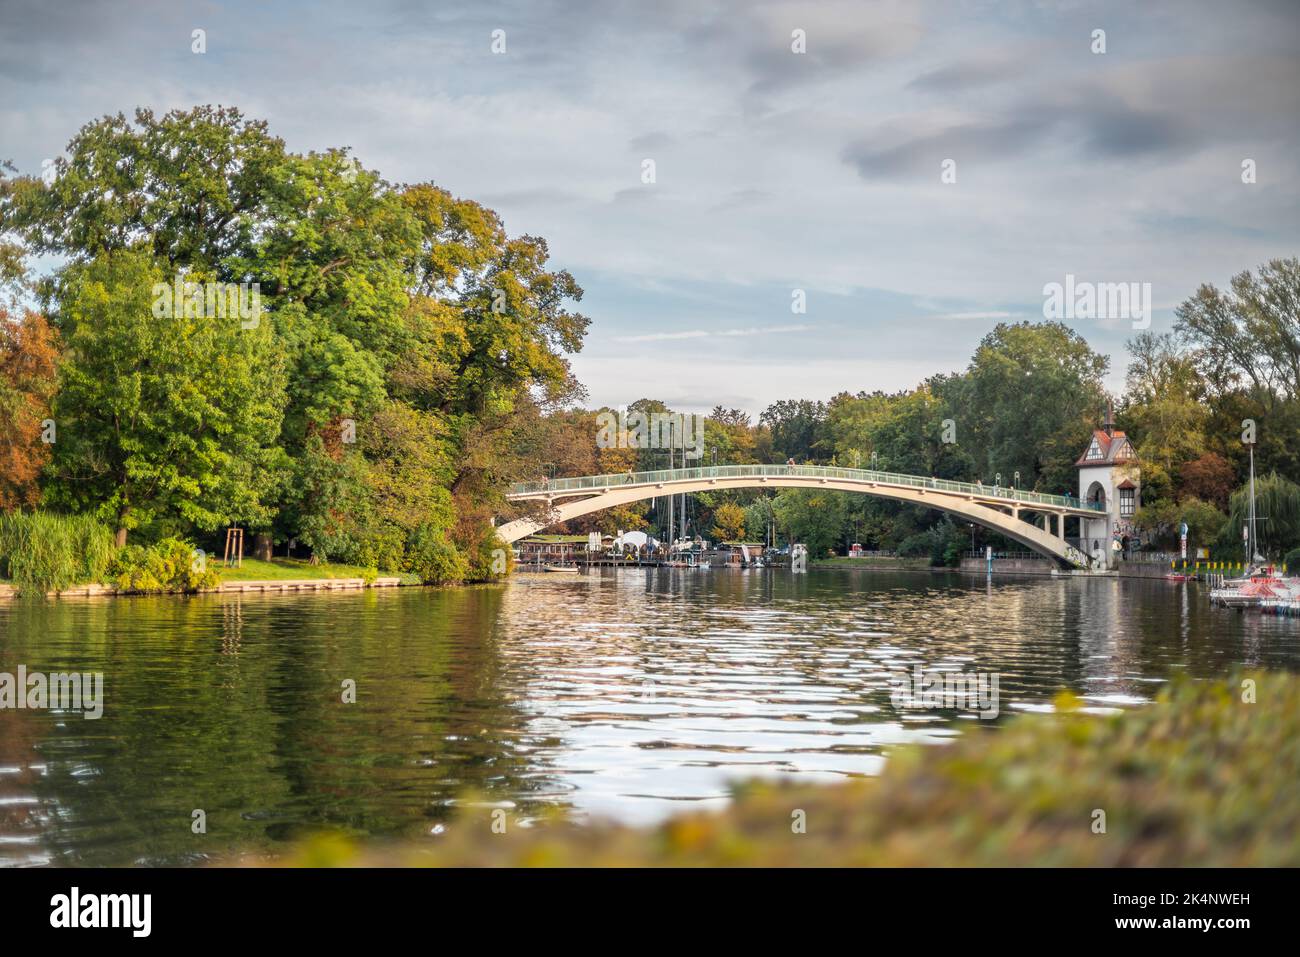 Abteibrücke (Abbey bridge) over the river Spree leading to the Island of Youth (Insel der Jugend) during autumn, Berlin Treptow, Germany, Europe Stock Photo